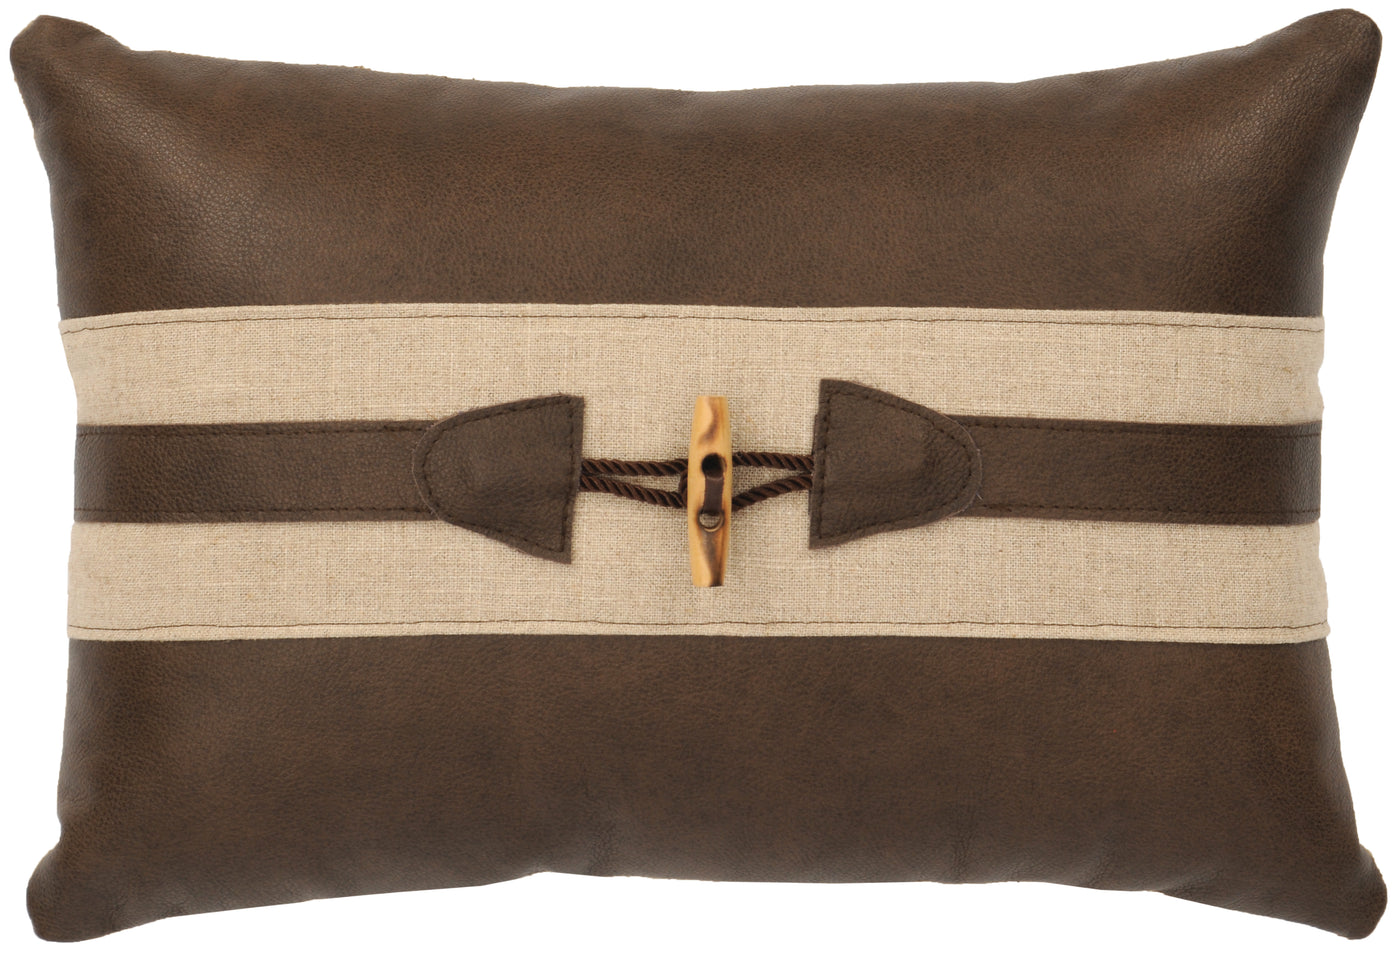 Canvello Stampede Leather Pillow 18"x18"